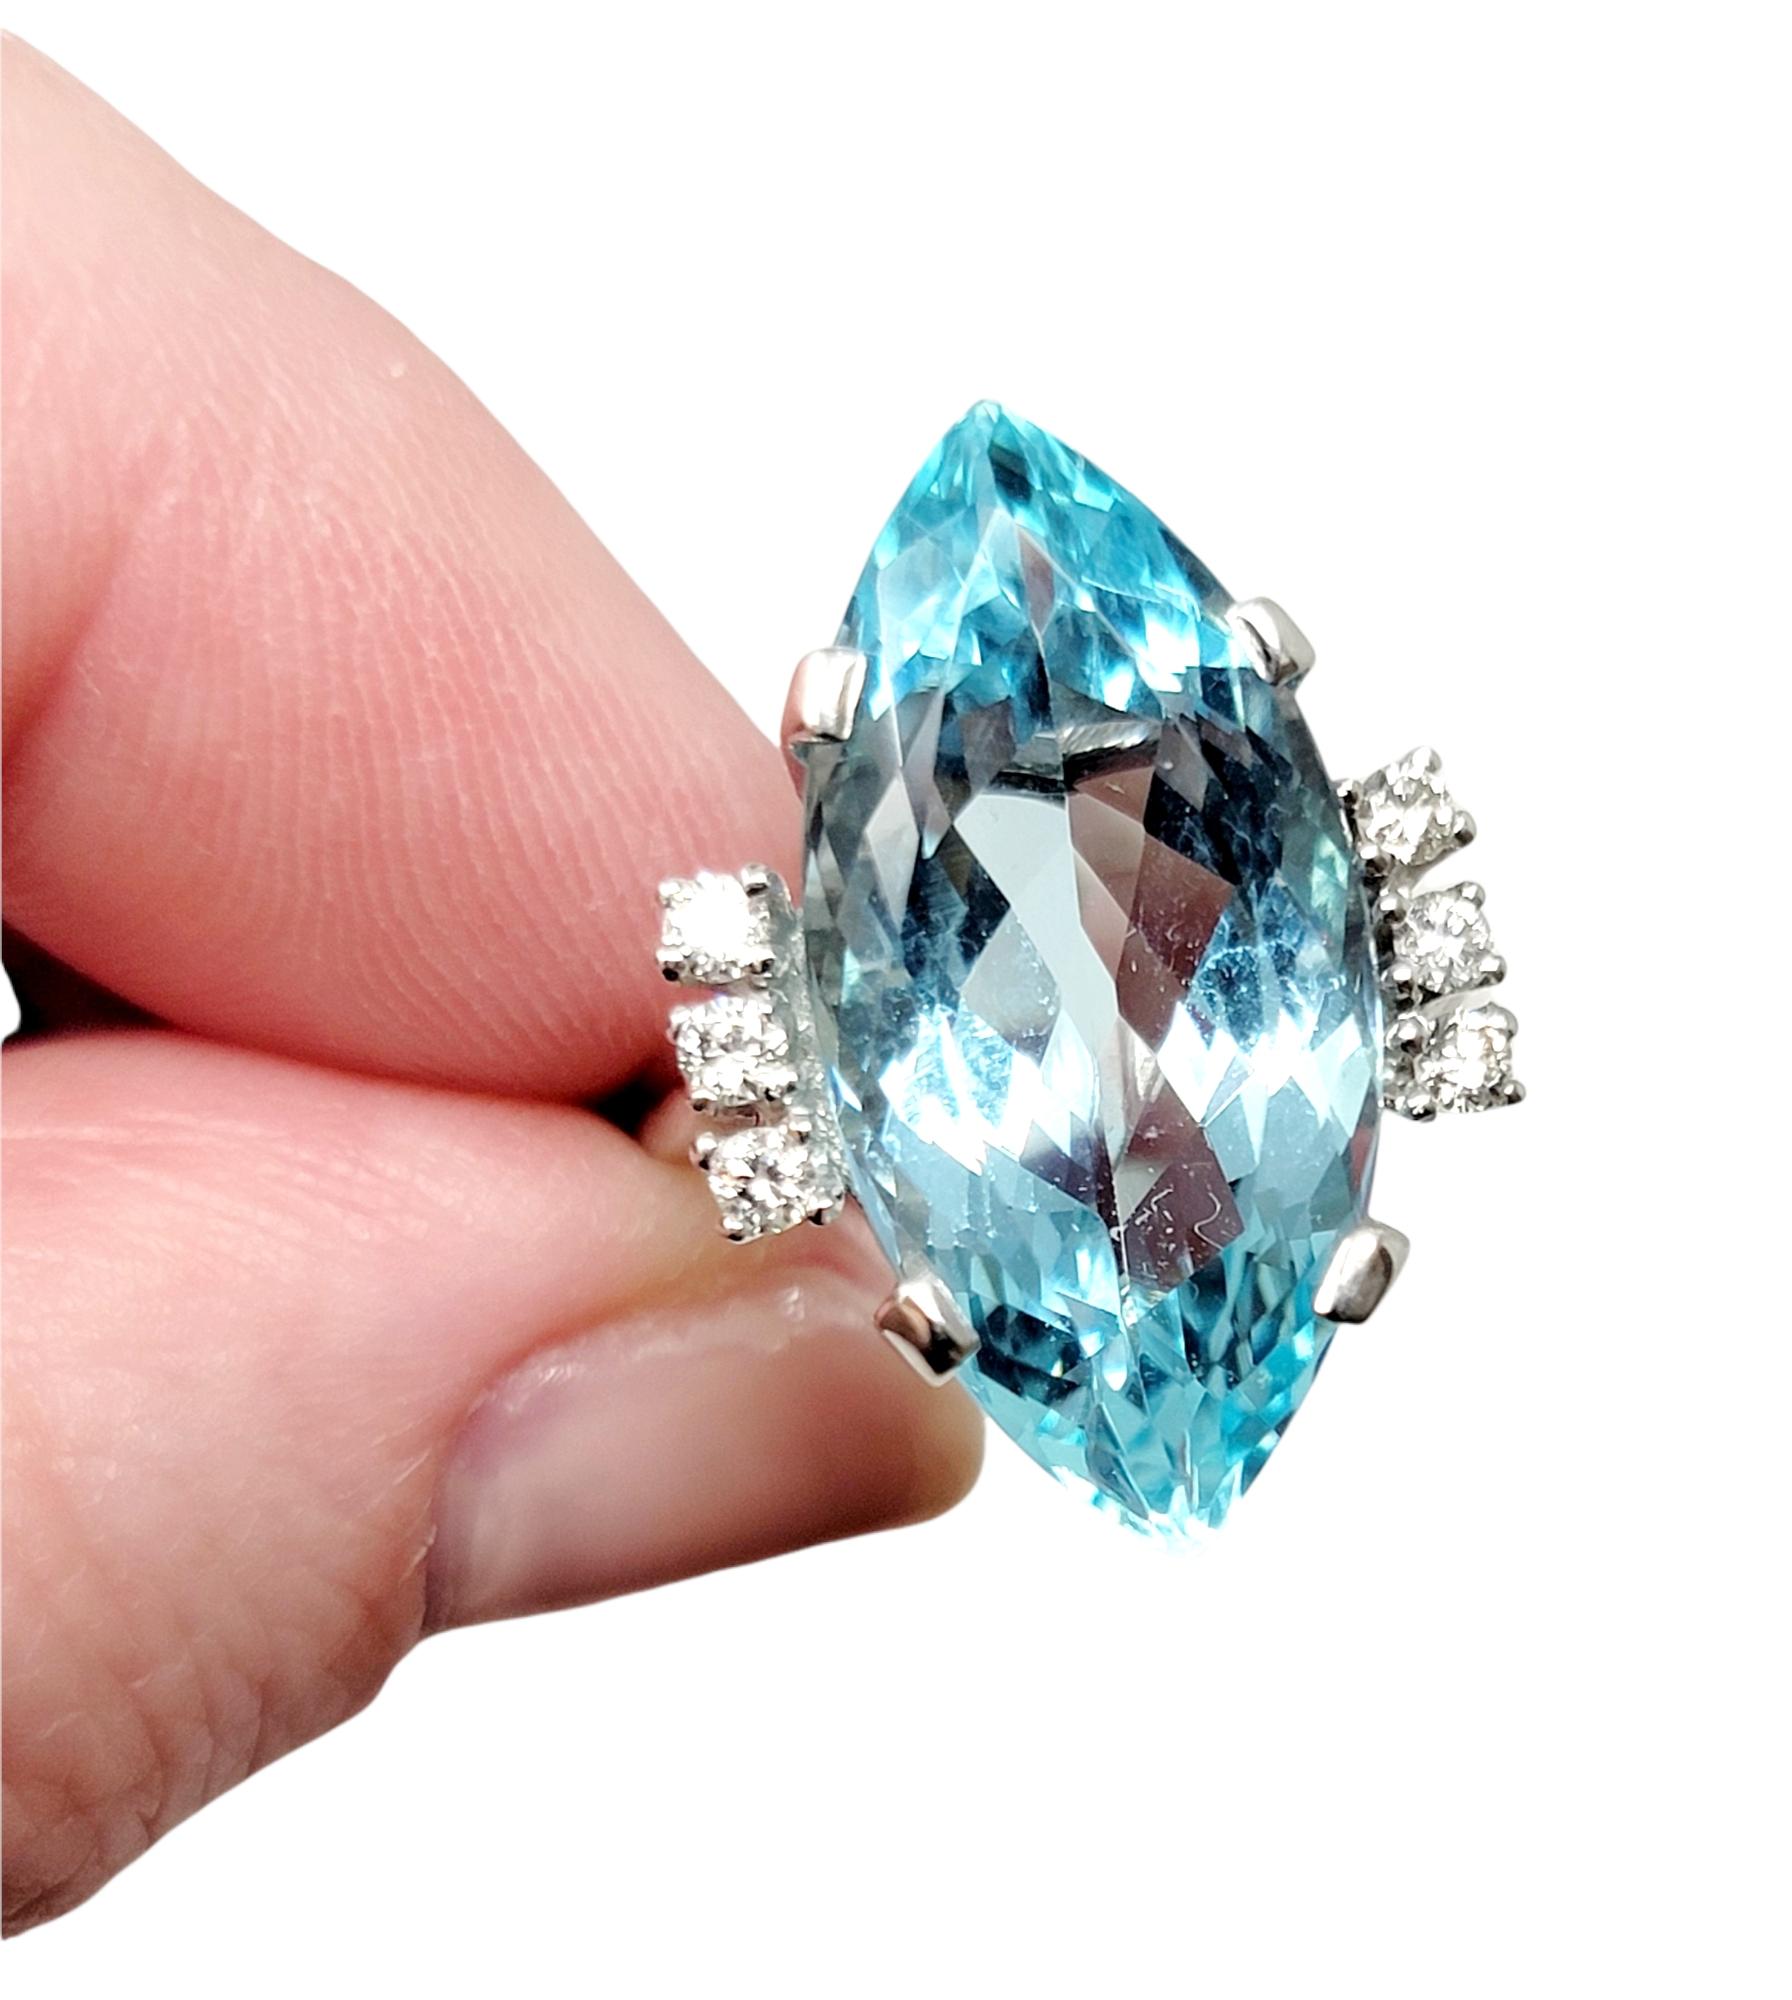 8.61 Carats Total Marquis Cut Aquamarine and Diamond Cocktail Ring 14 Karat Gold In Excellent Condition For Sale In Scottsdale, AZ